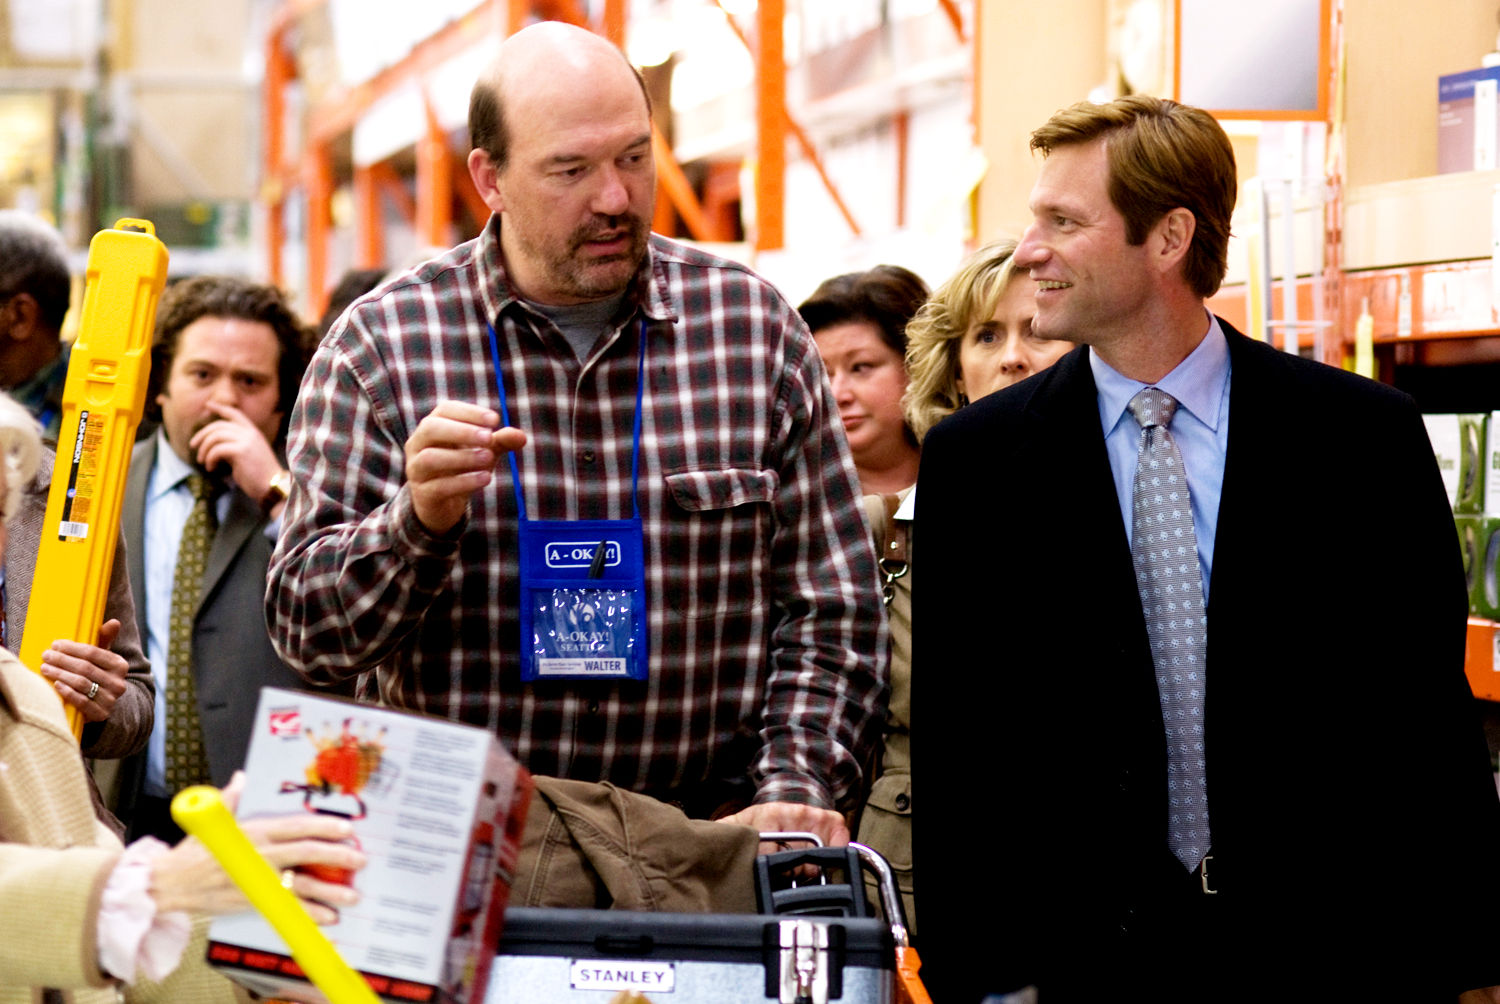 John Carroll Lynch stars as Walter and Aaron Eckhart stars as Burke Ryan in Universal Pictures' Love Happens (2009)